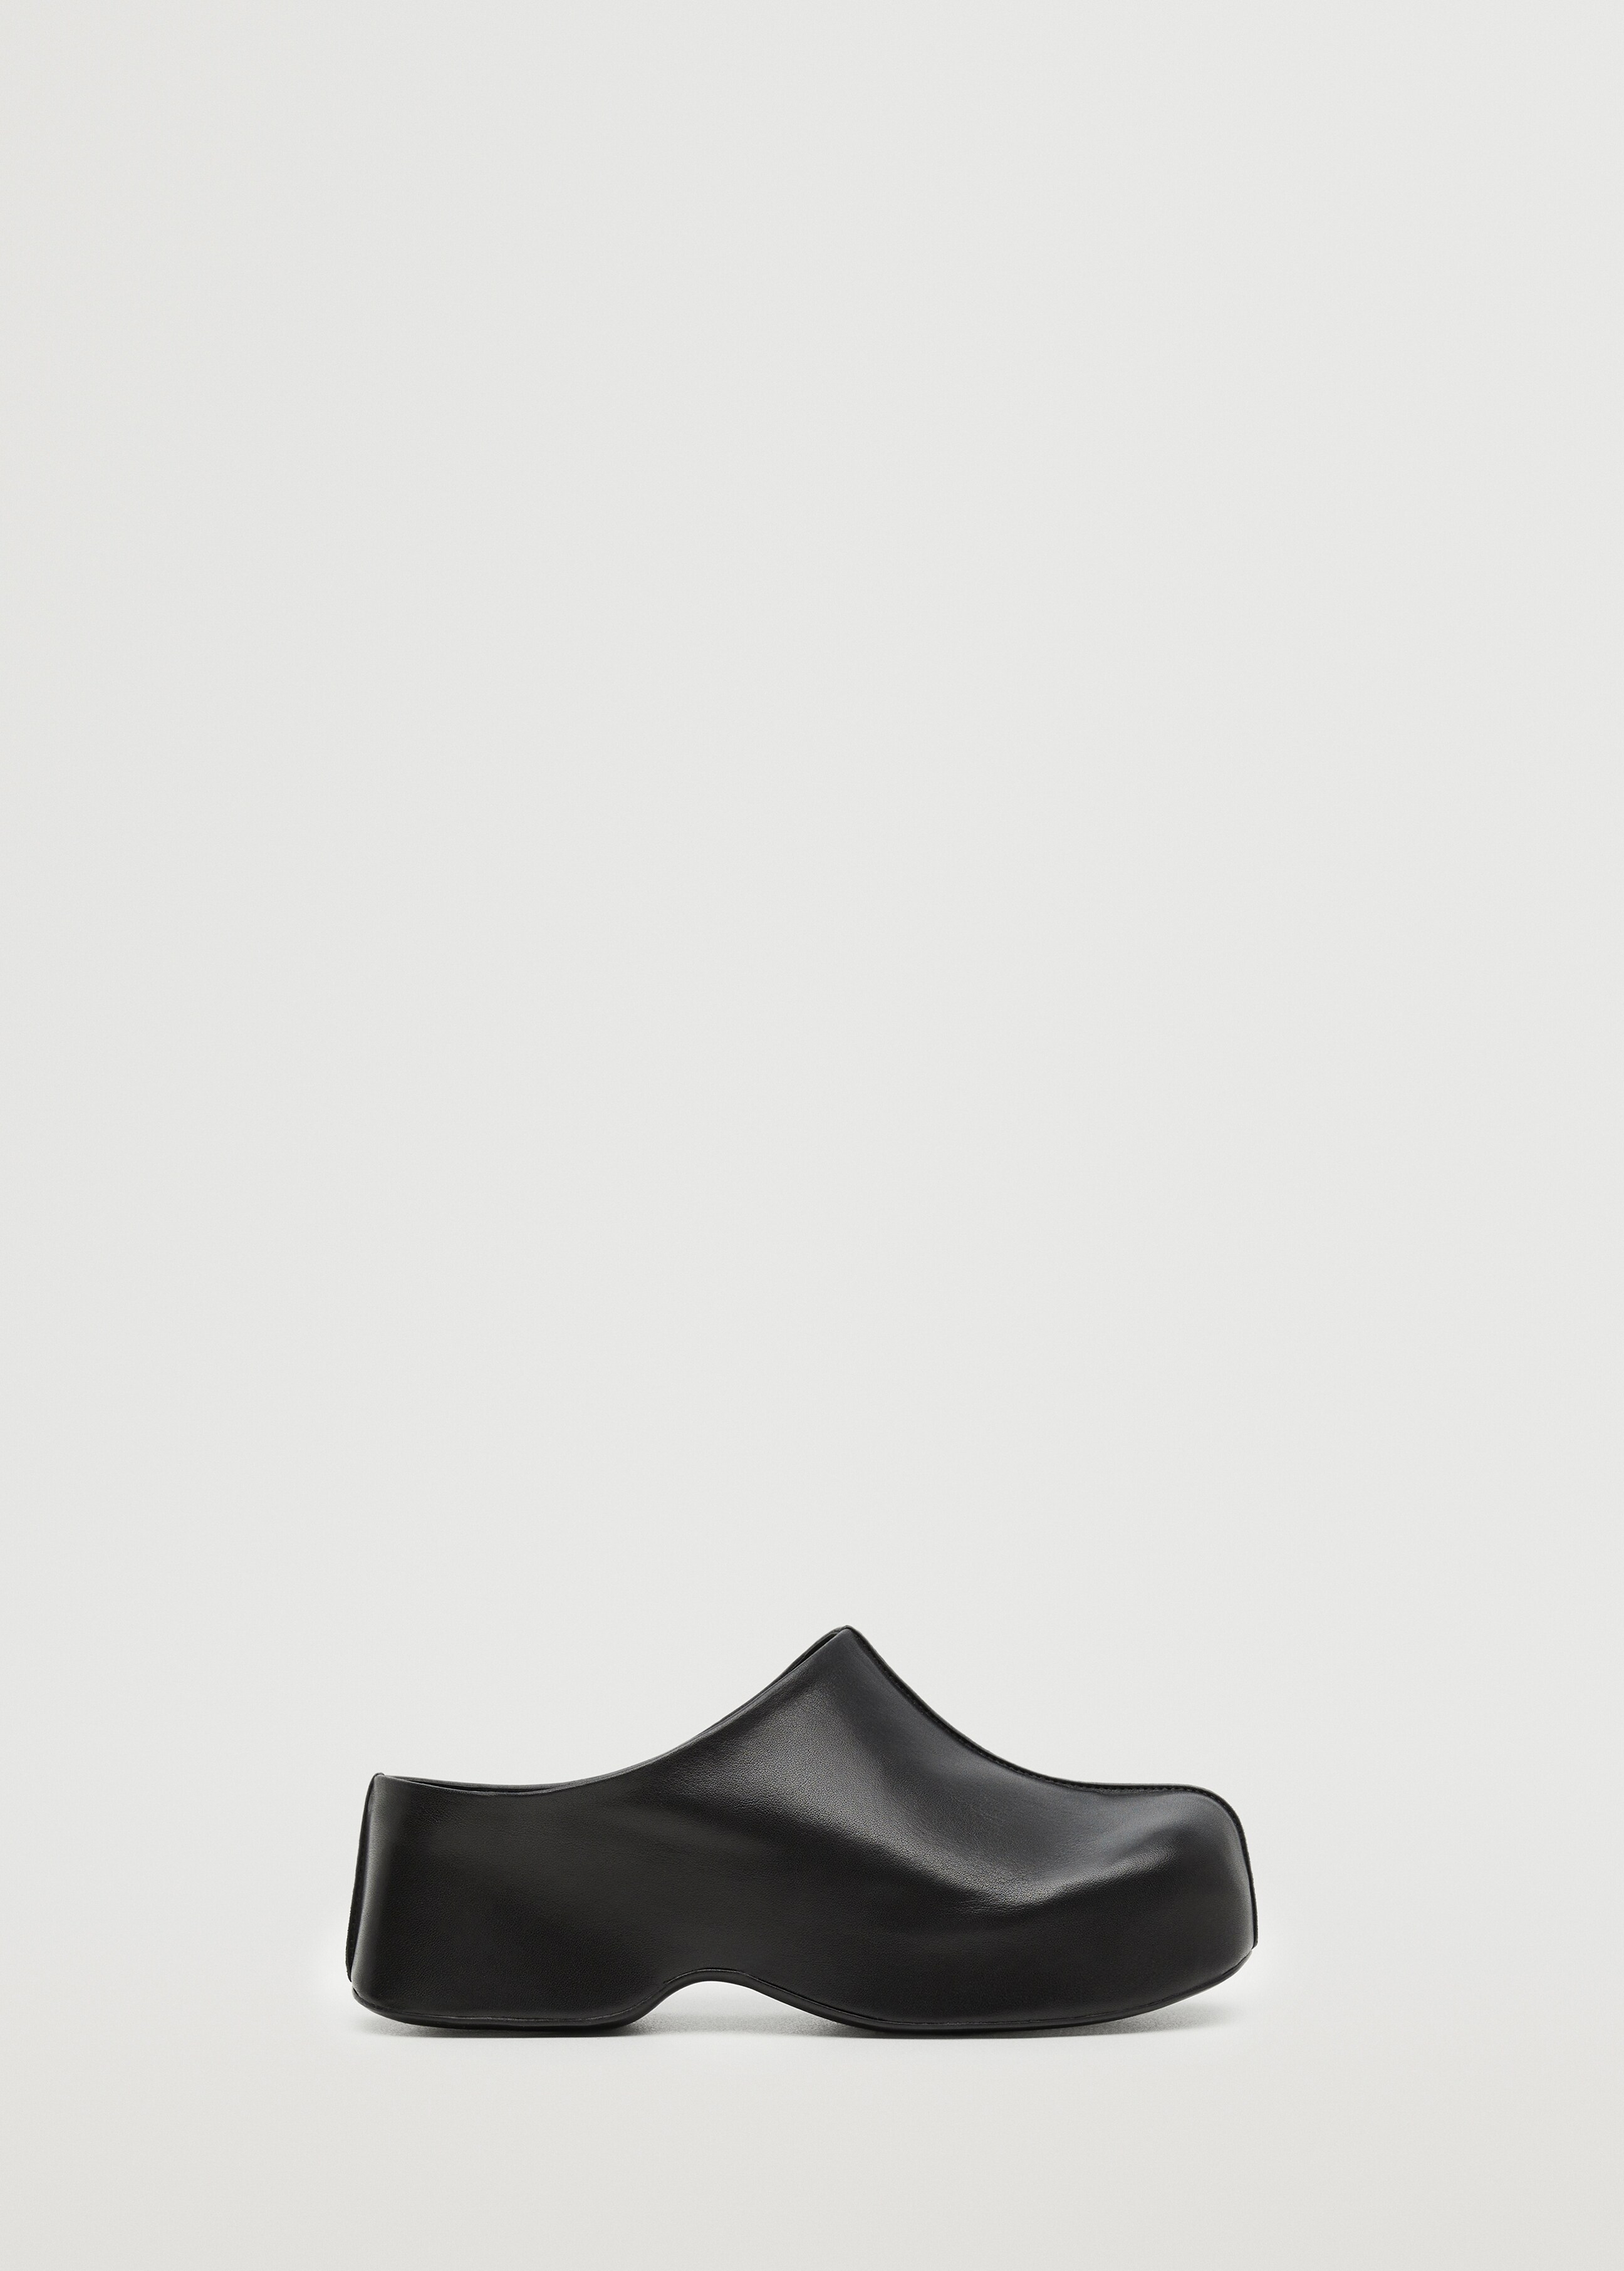 Leather clog - Article without model